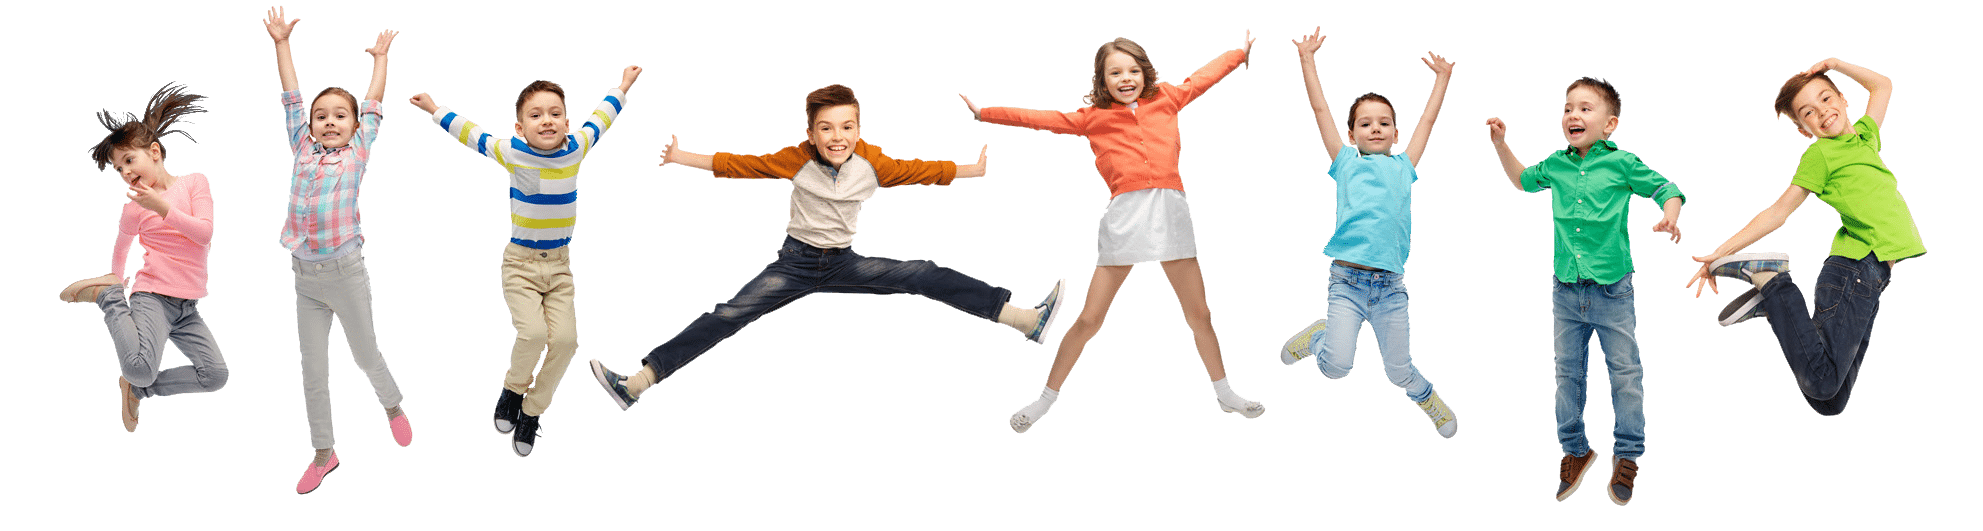 excited group of elementary school age children jumping for joy